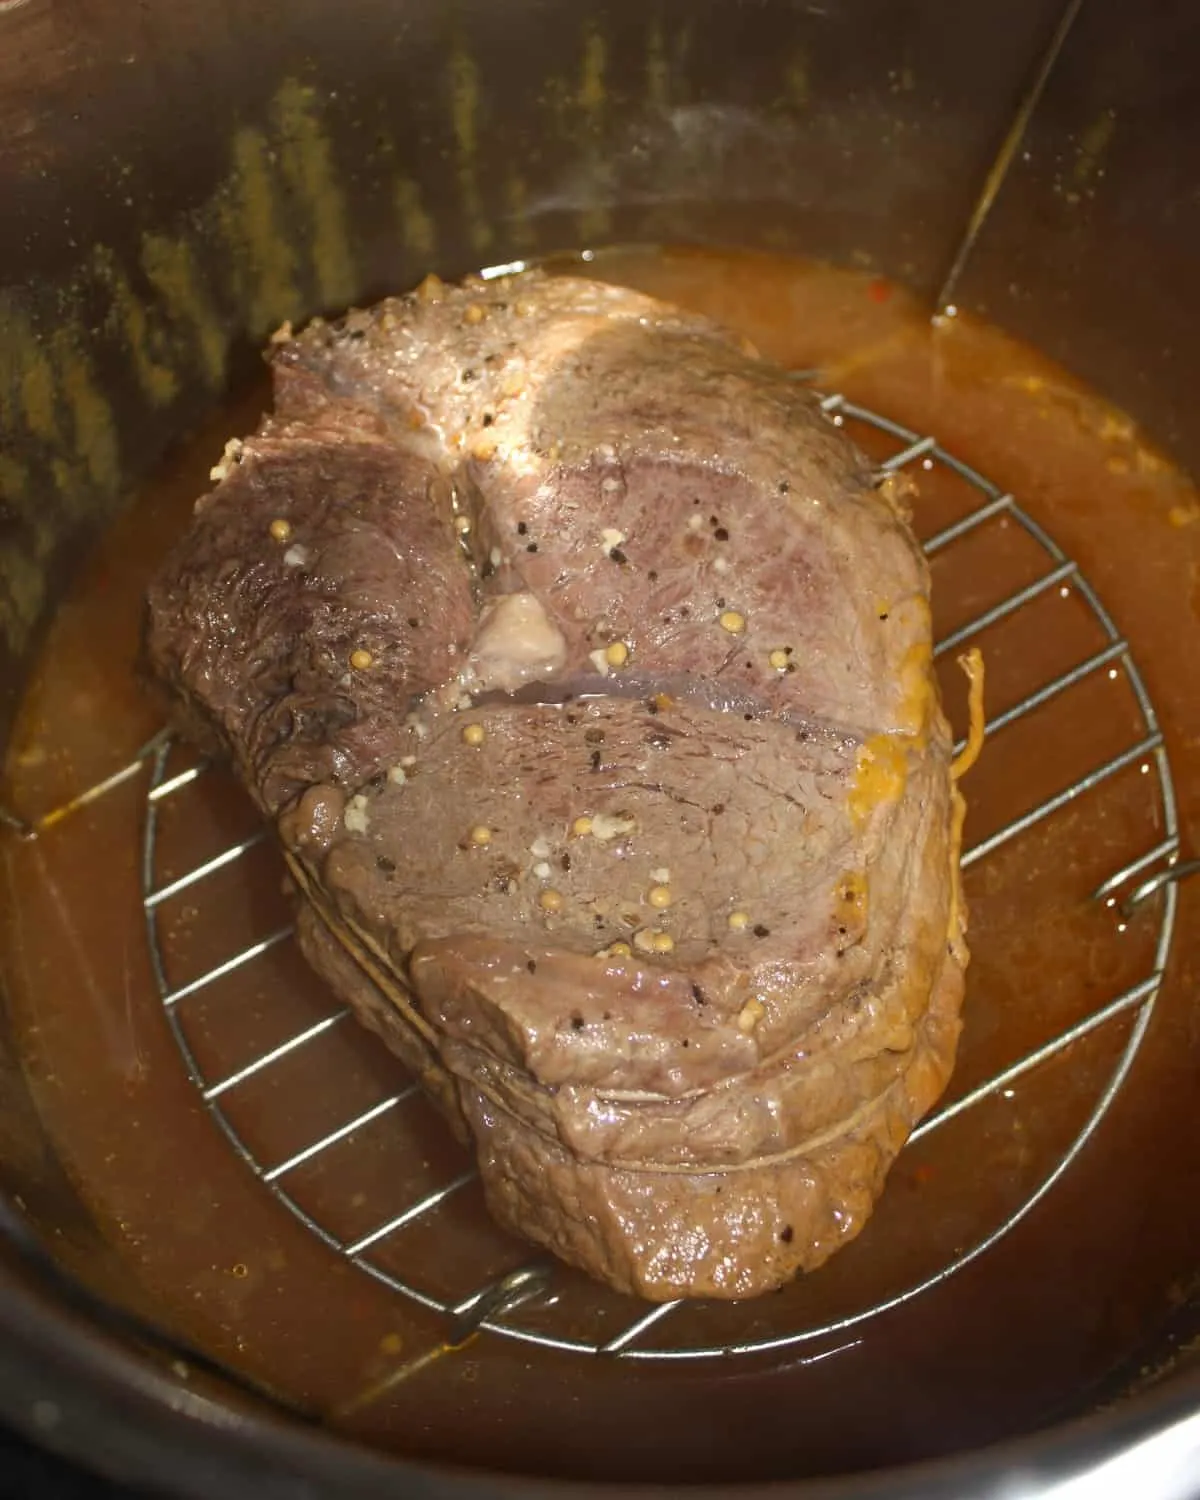 Sunday dinners can be made any day of the week when you have an Instant Pot.  Try out this Instant Pot Sirloin Roast with Mashed Potatoes and people will think you have been cooking for hours!